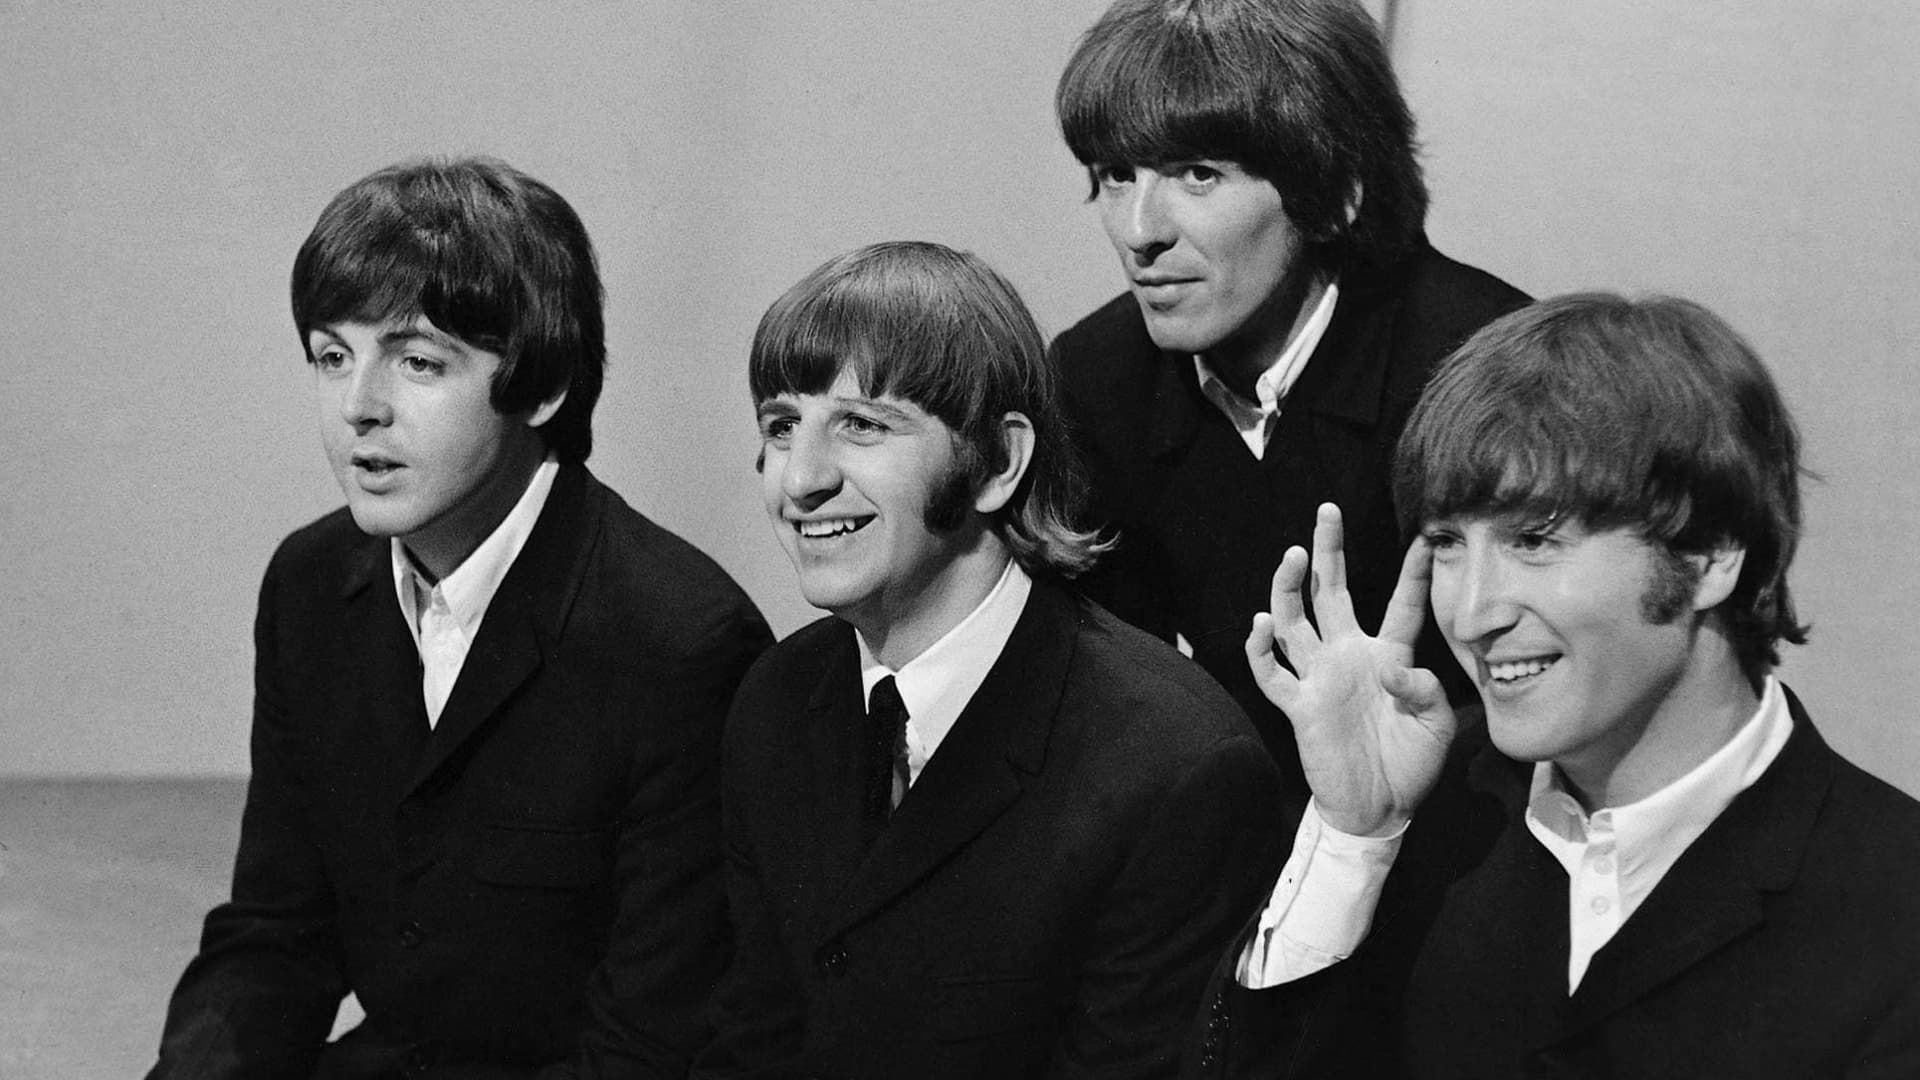 A new Beatles song is set for release after 45 years — with help from AI